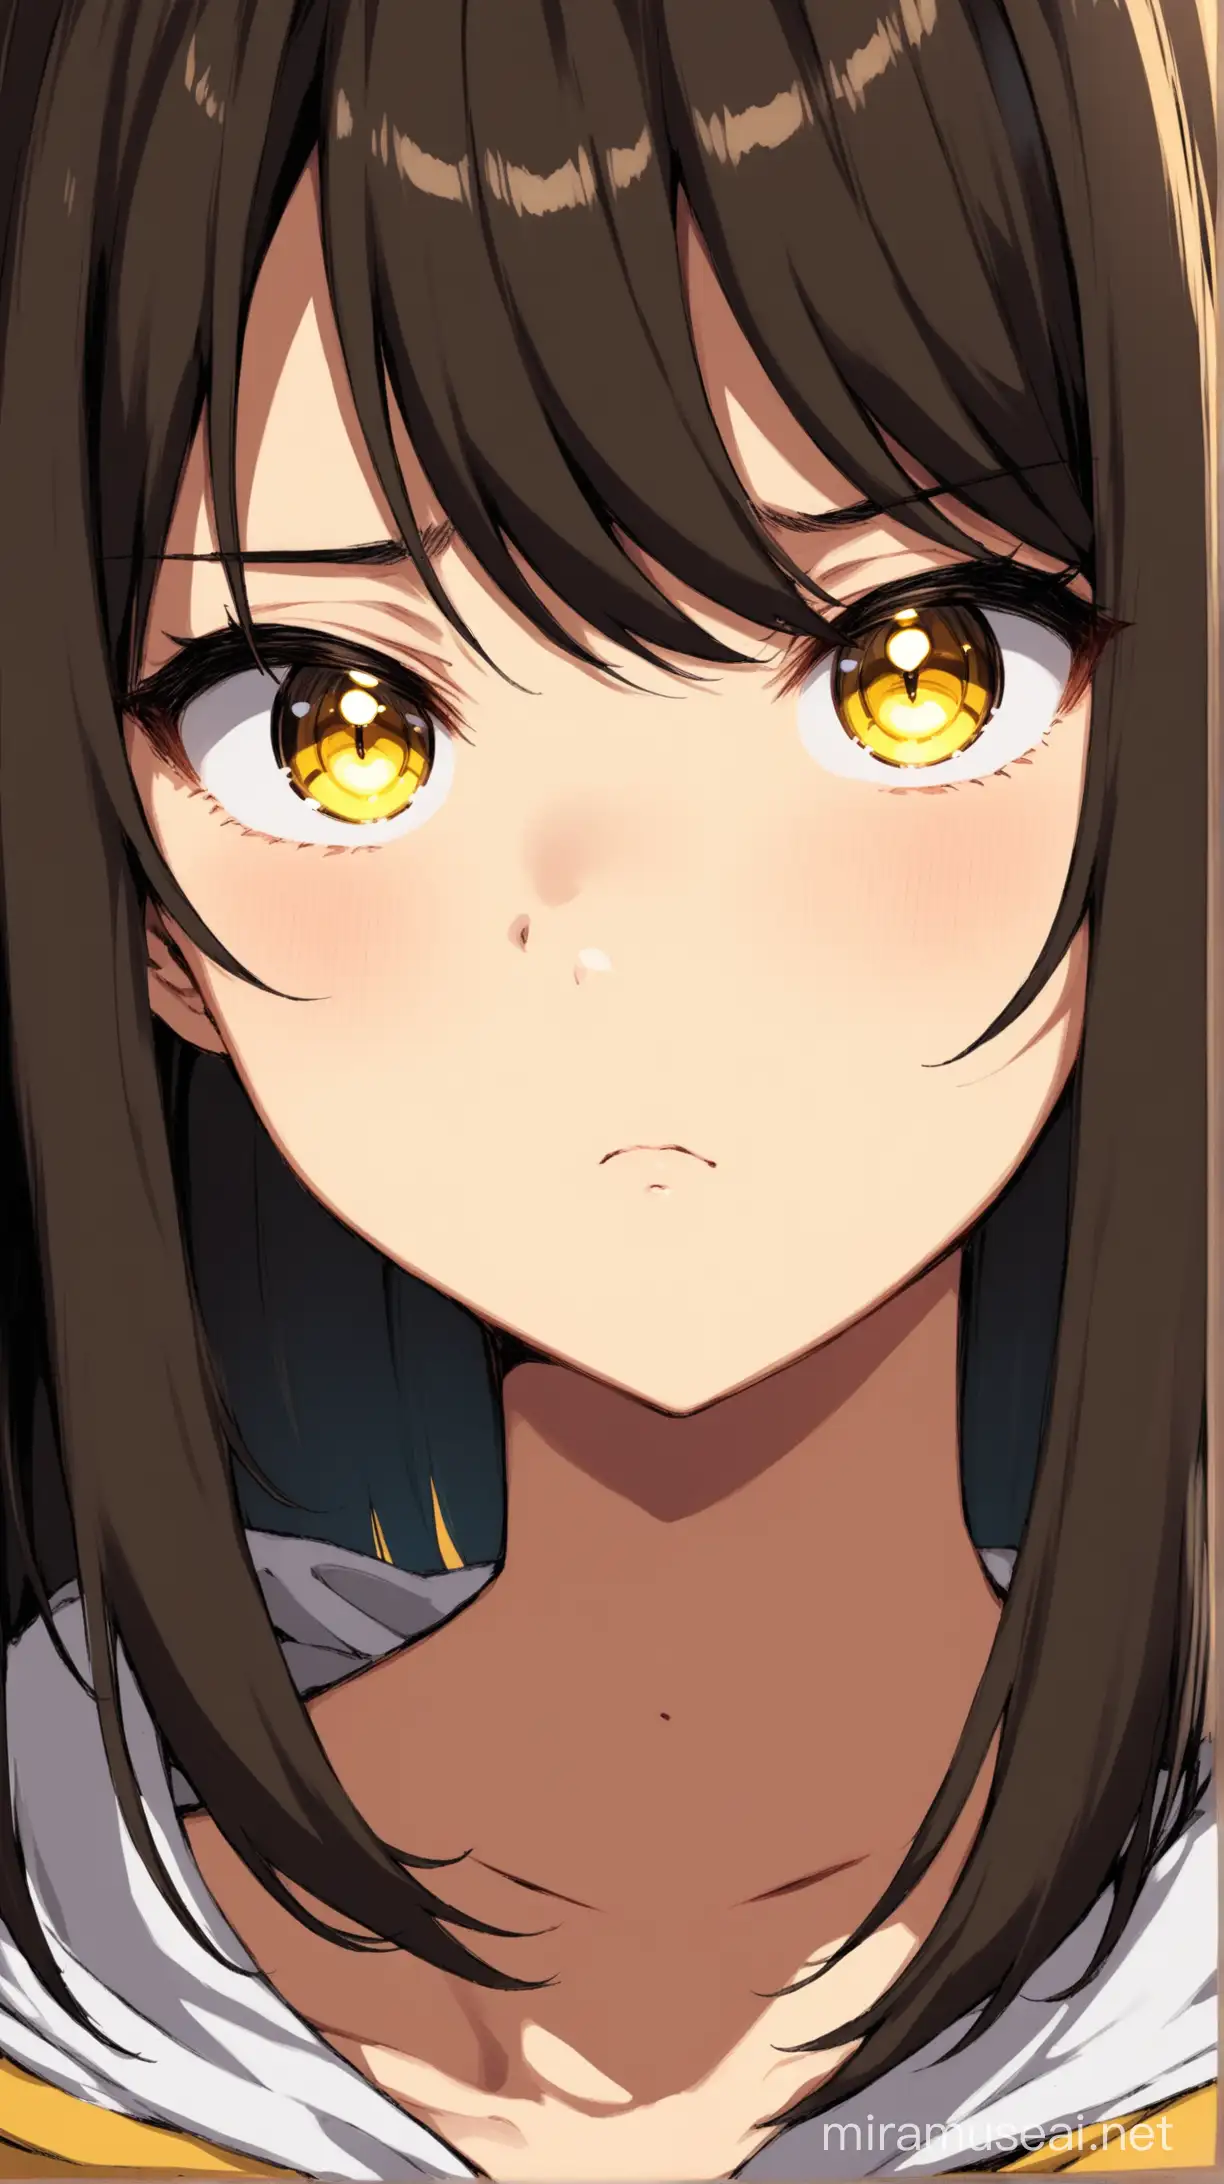 Nemuidere Brunette Anime Girl with Yellow Eyes and Tired Expression